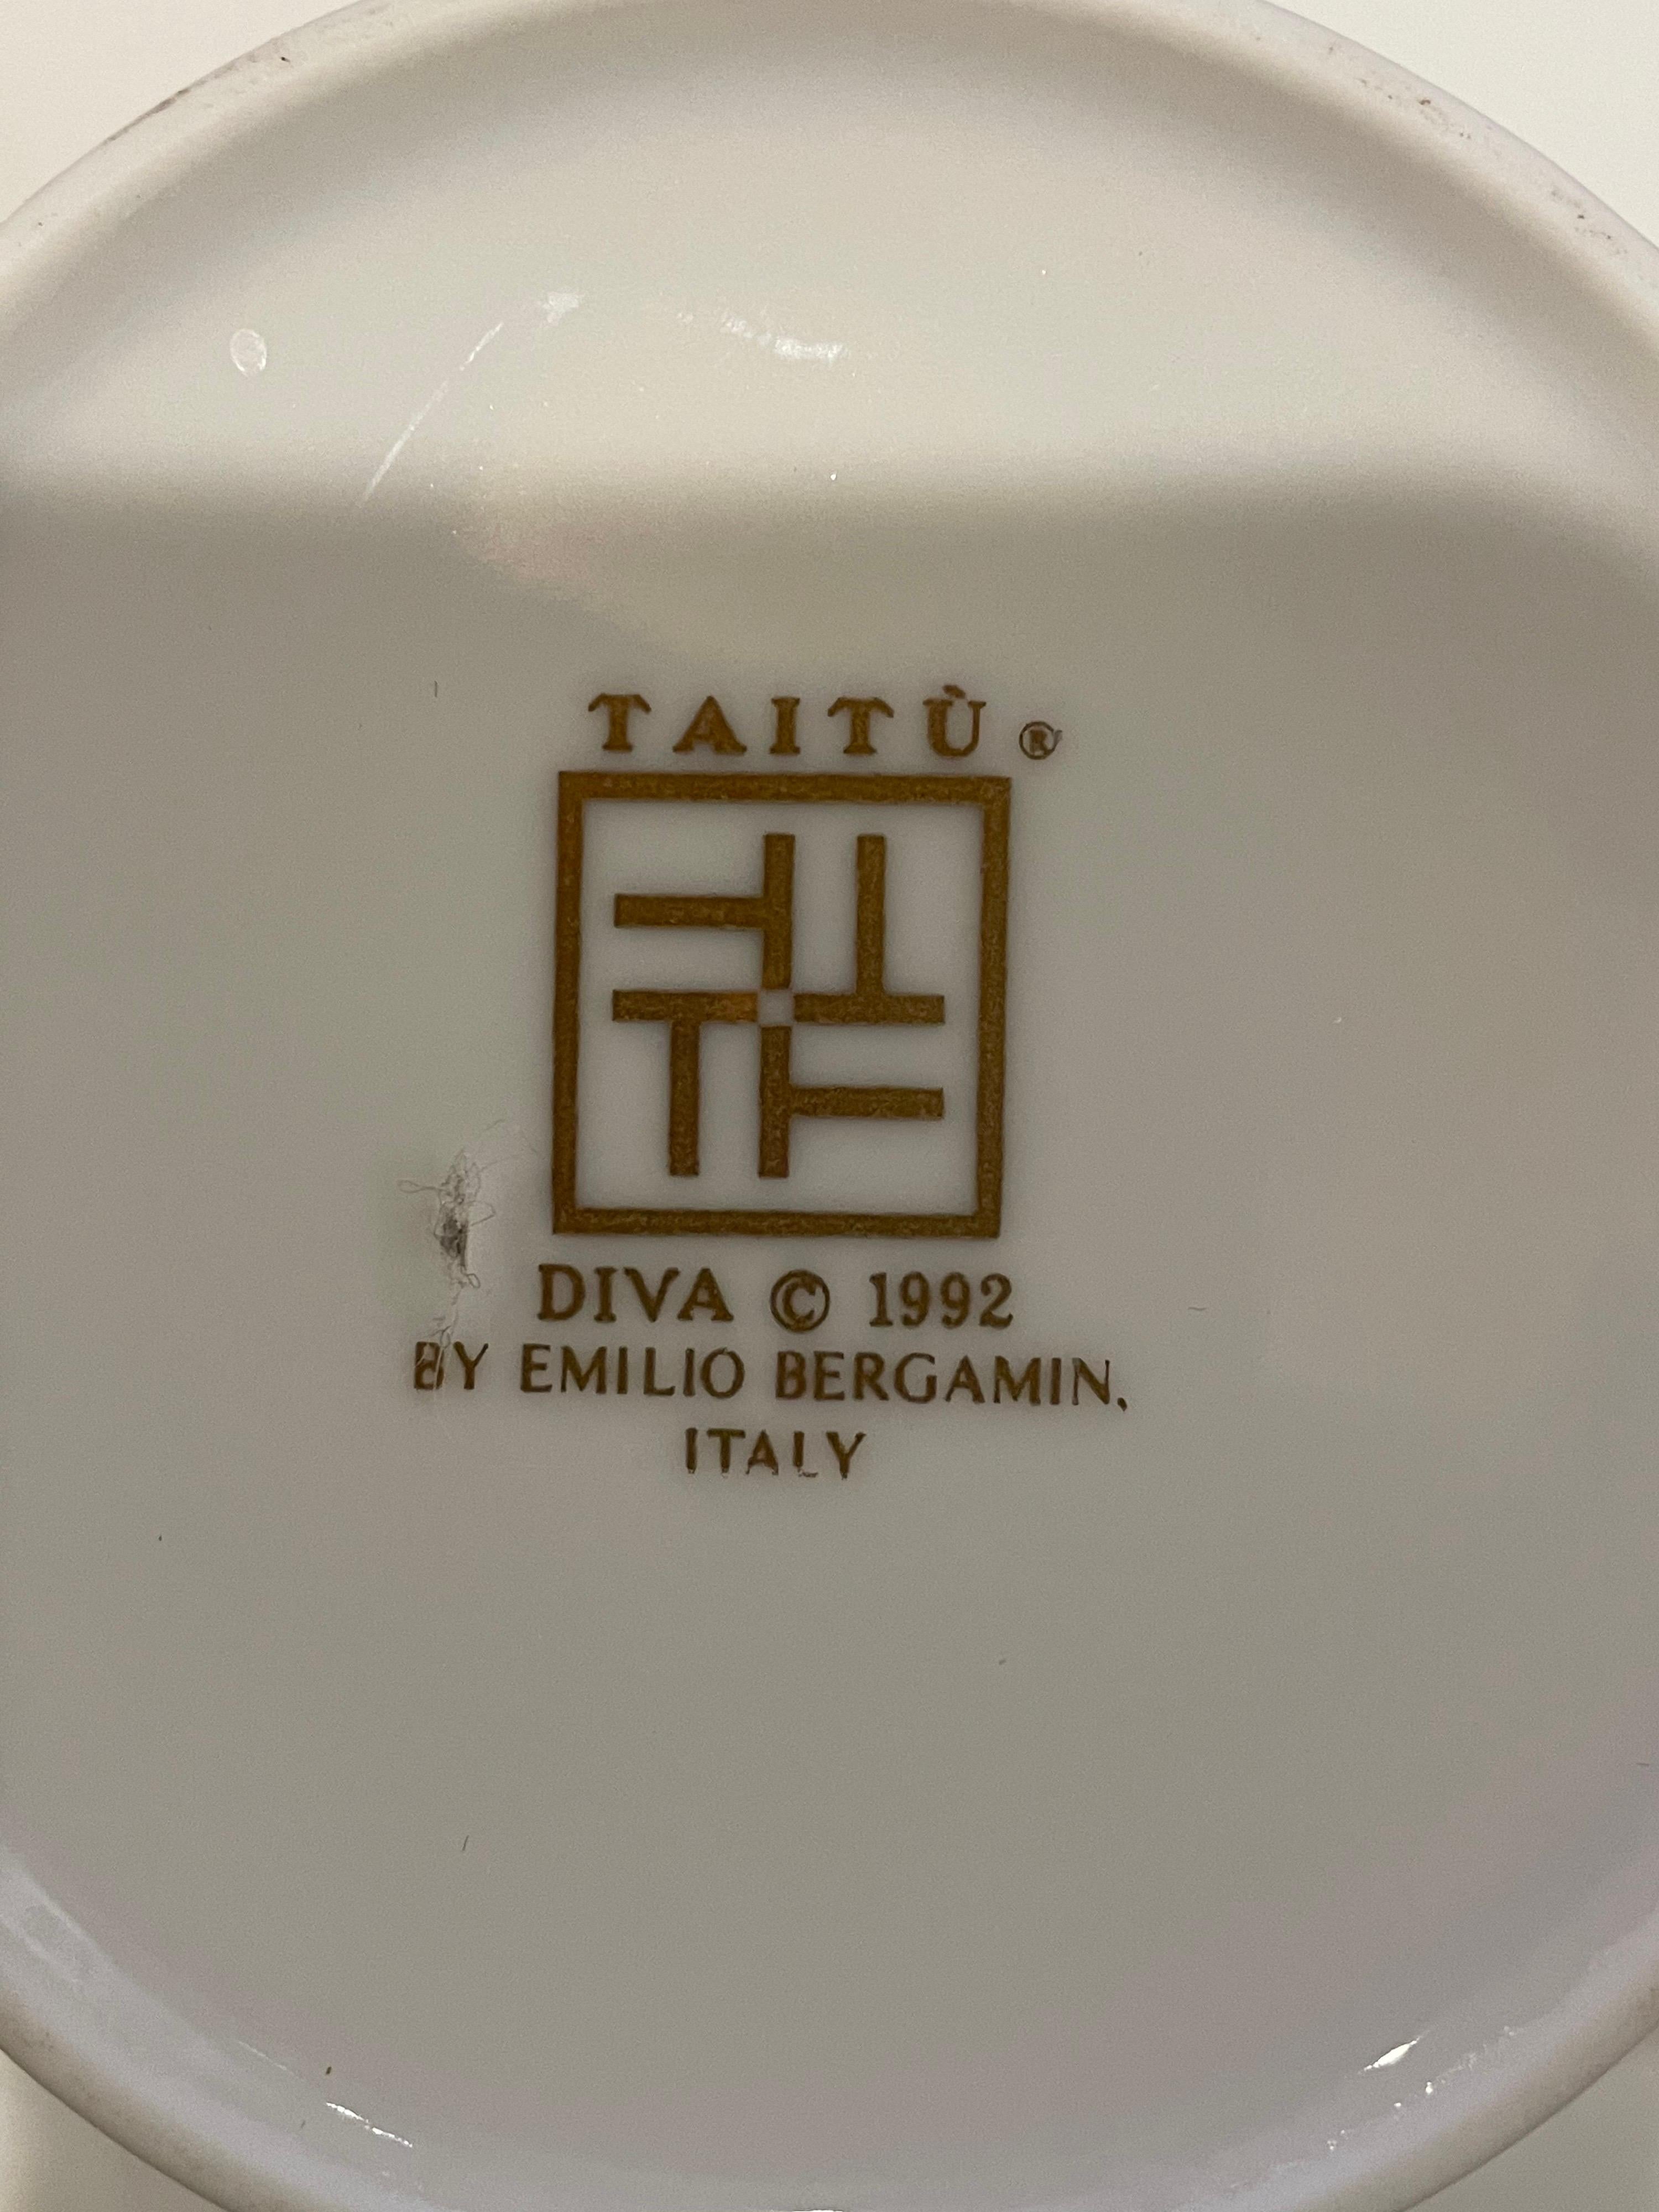 Incredible set designed by Emilio Bergamin for Taitu Italy, circa 1992 Diva set in porcelain with gold accents, 48 pieces we can split the set into 2 sets of 4 if desired, 8 cups, salad plates, soup plates, cup plates, and cups.

Measures: Eight